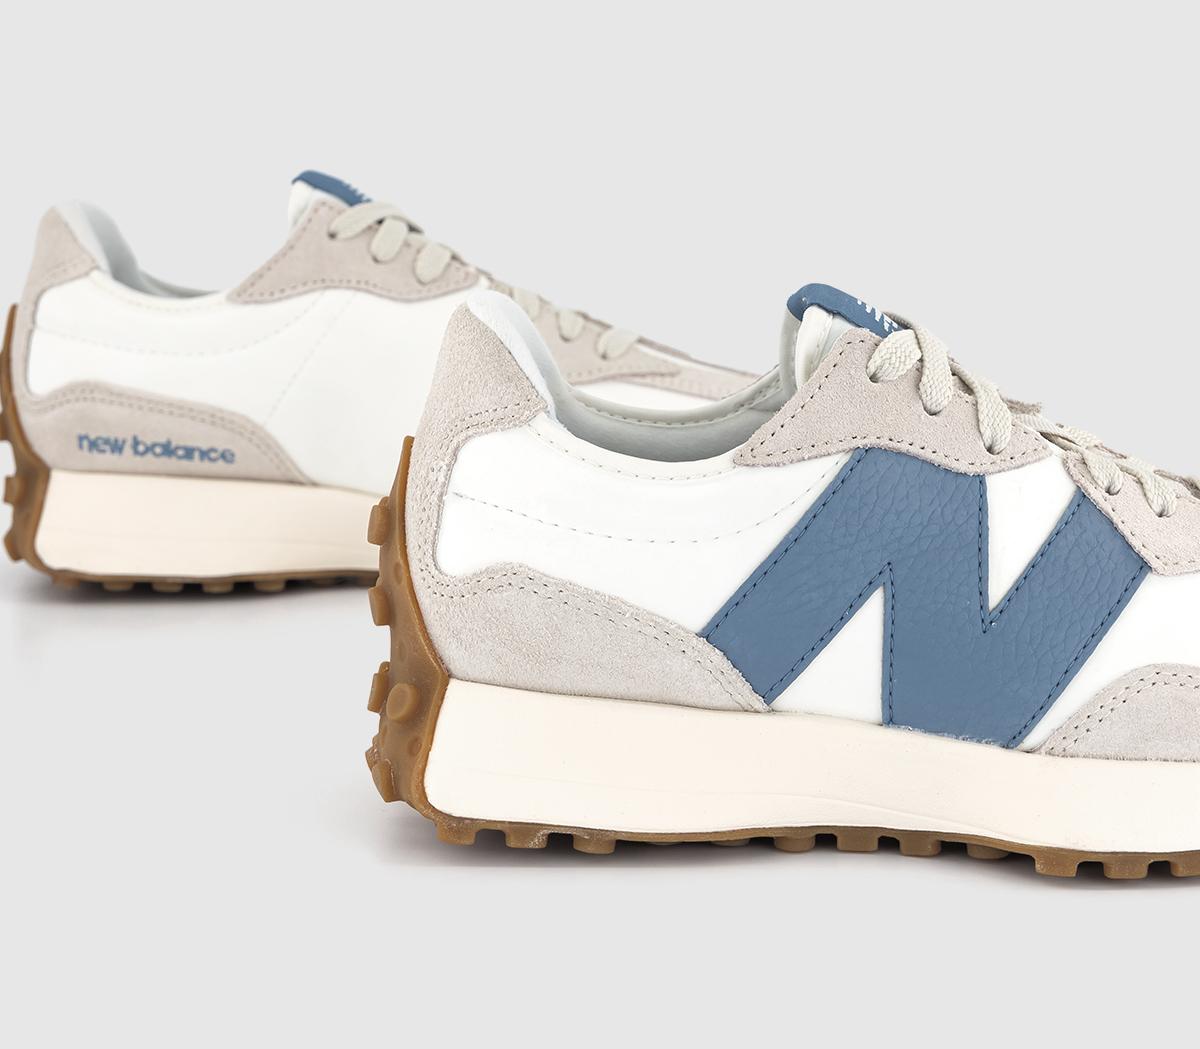 New Balance 327 Trainers Mercury Blue Offwhite Grey - Men's Trainers